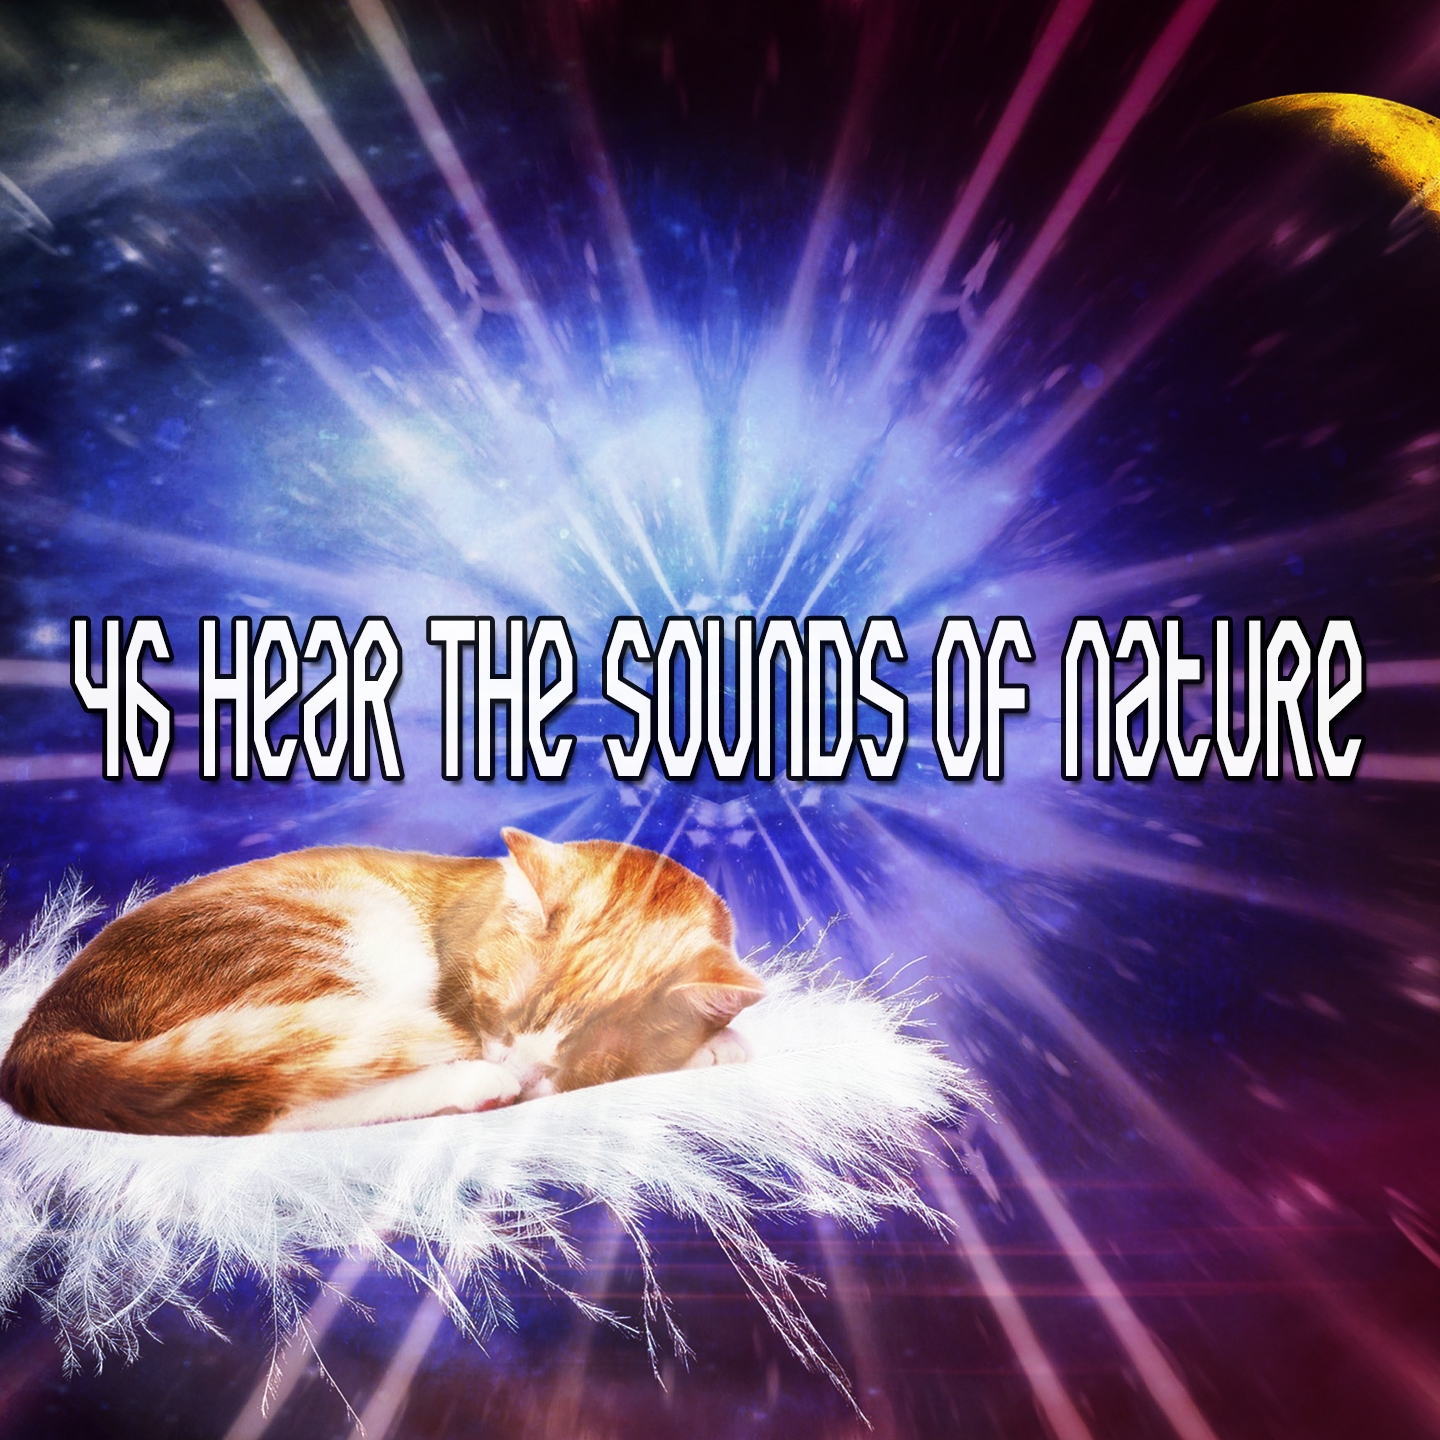 46 Hear The Sounds Of Nature